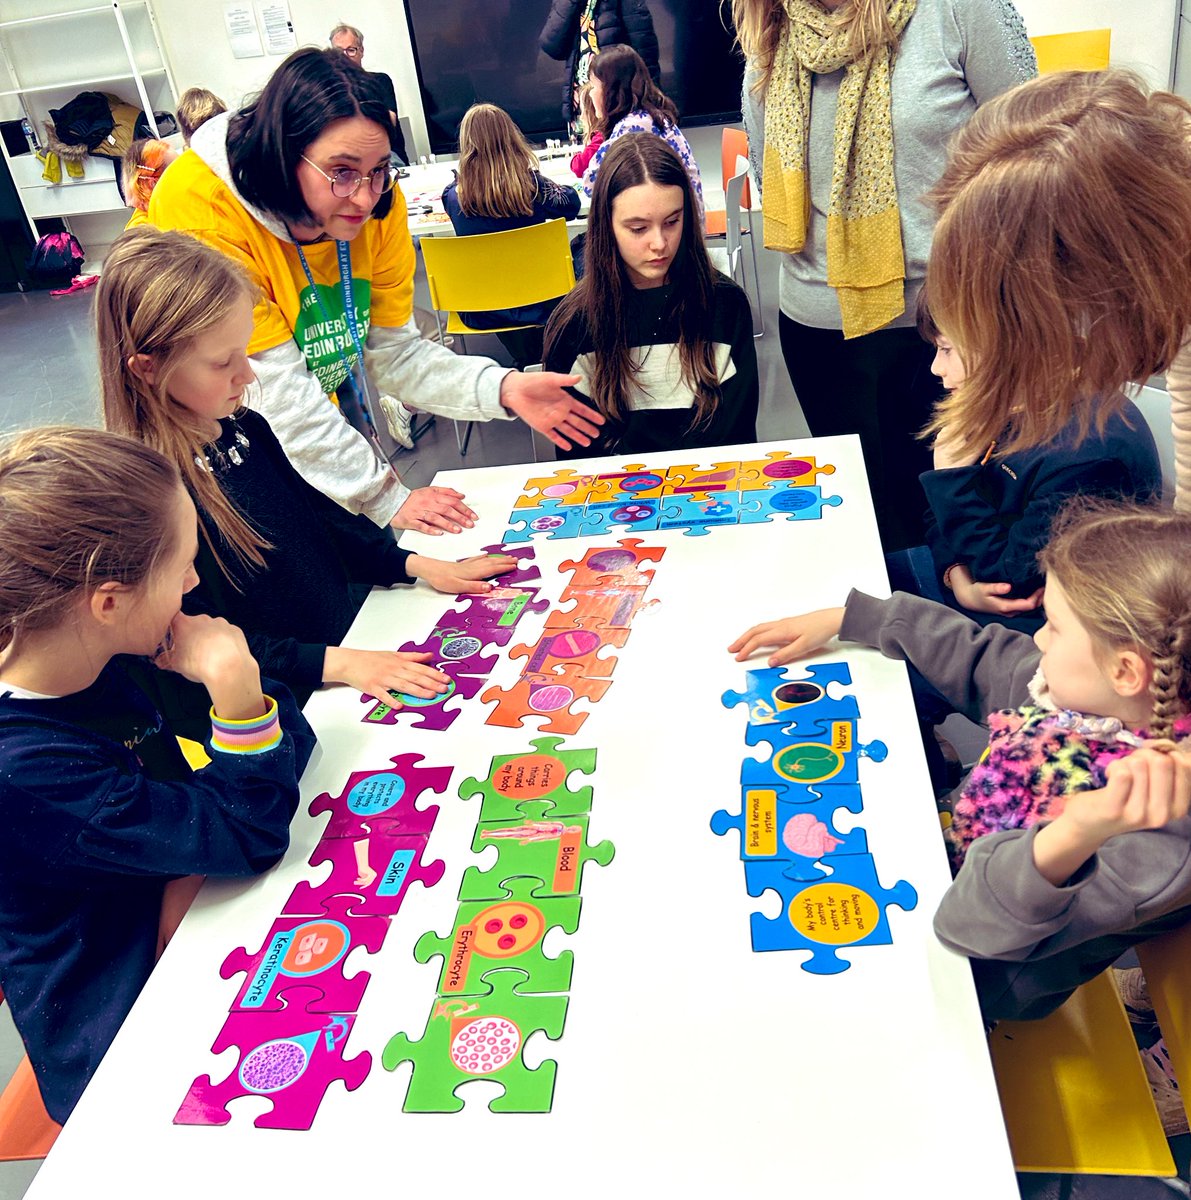 A selection of @EBQCommunity engagement activities are featured in our News roundup including @CastlebraeCCC Superlab, @EdinUni_CRH at @EdSciFest, STEM Education workshops and science meets art in Jar in Action. edinburghbioquarter.com/bioquarter-com… #STEMeducation